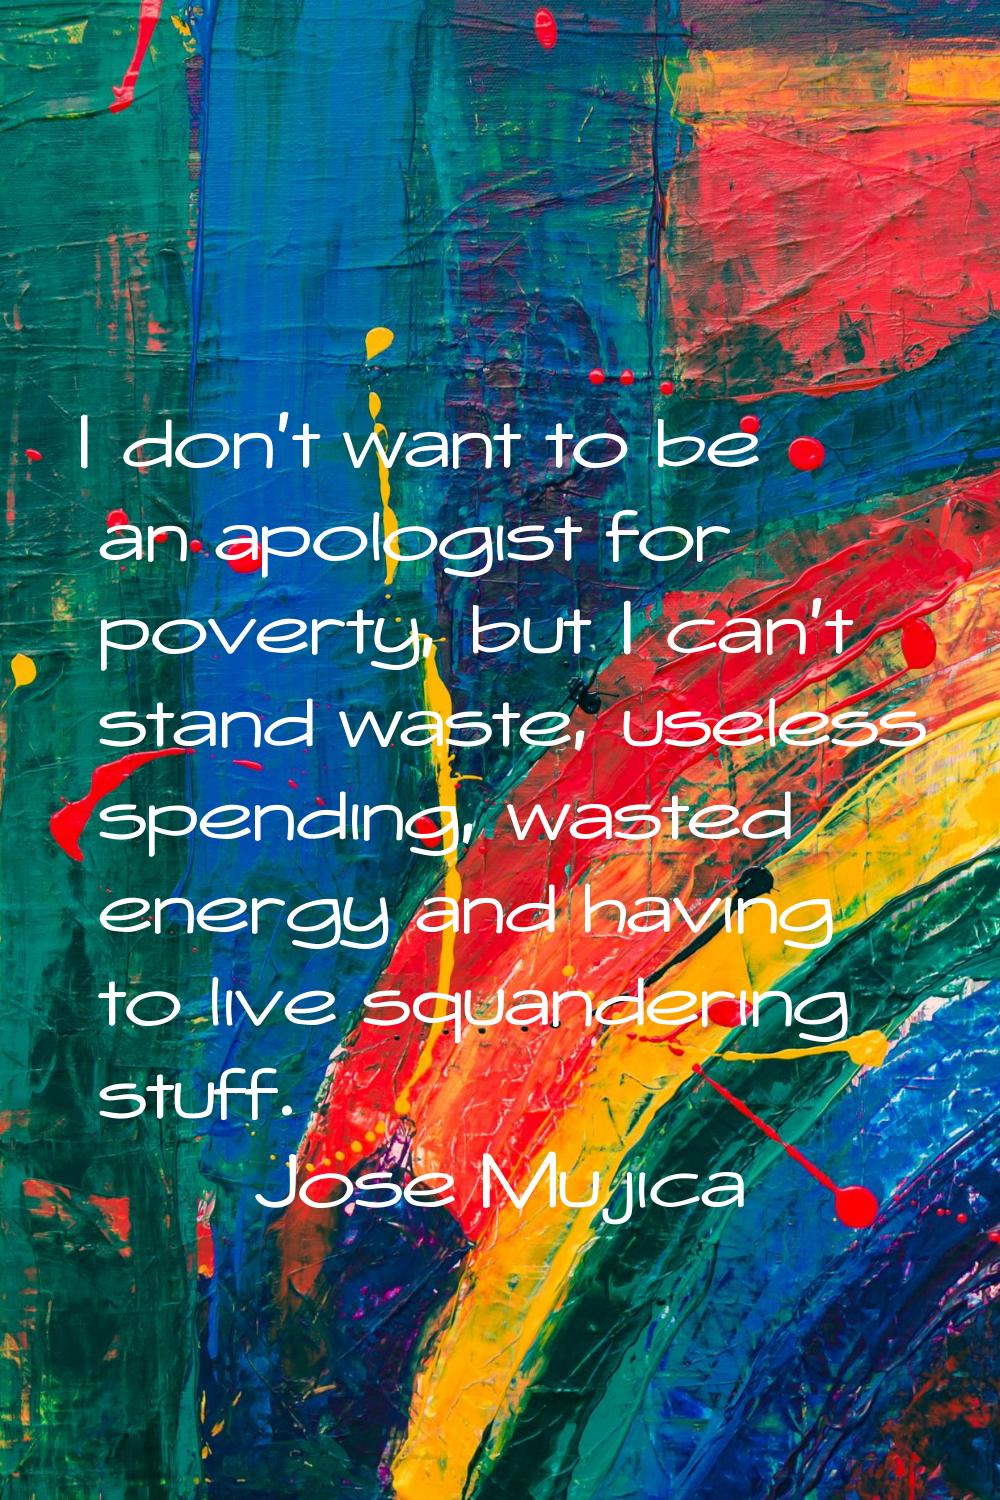 I don't want to be an apologist for poverty, but I can't stand waste, useless spending, wasted ener